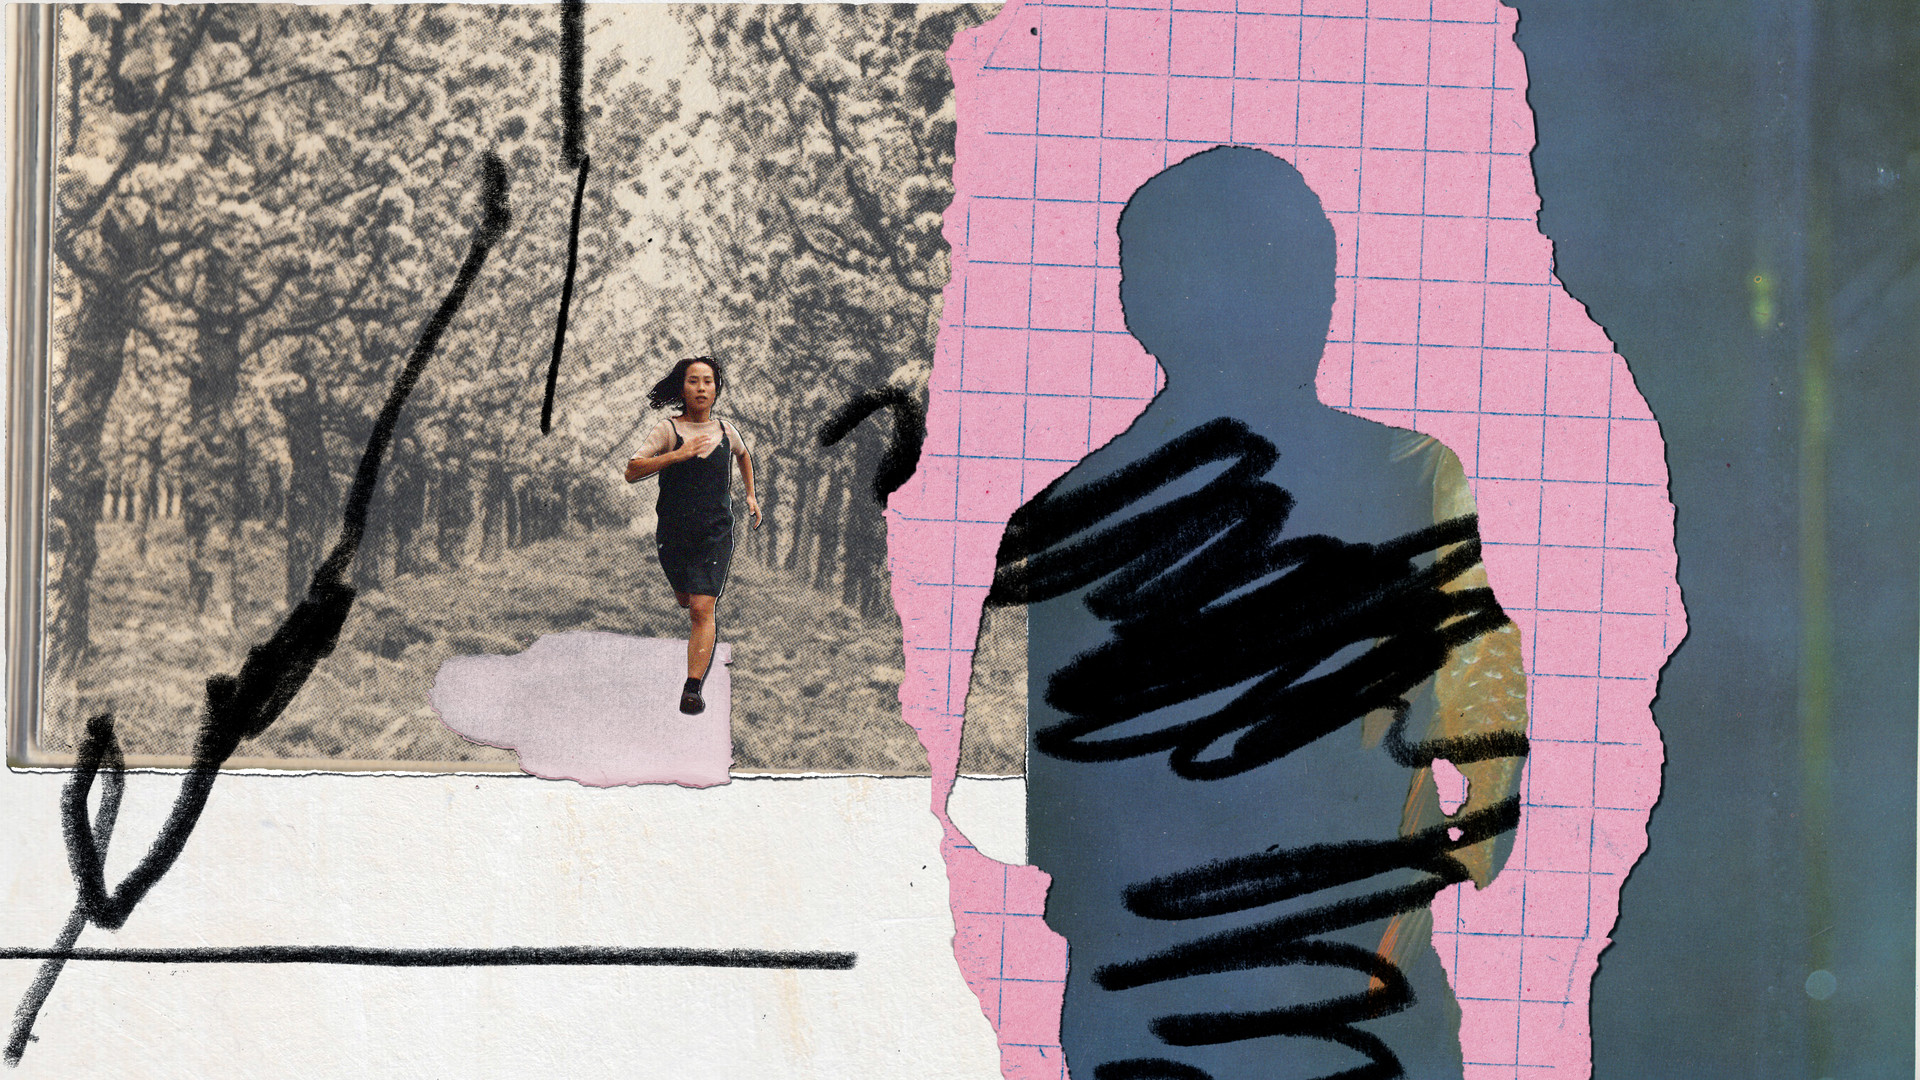 A still from the film Love, Dad. It is a collage of a woman running, black and white trees in an avenue, pink graph paper with the cutout of a man and thick black pencil scribbles.